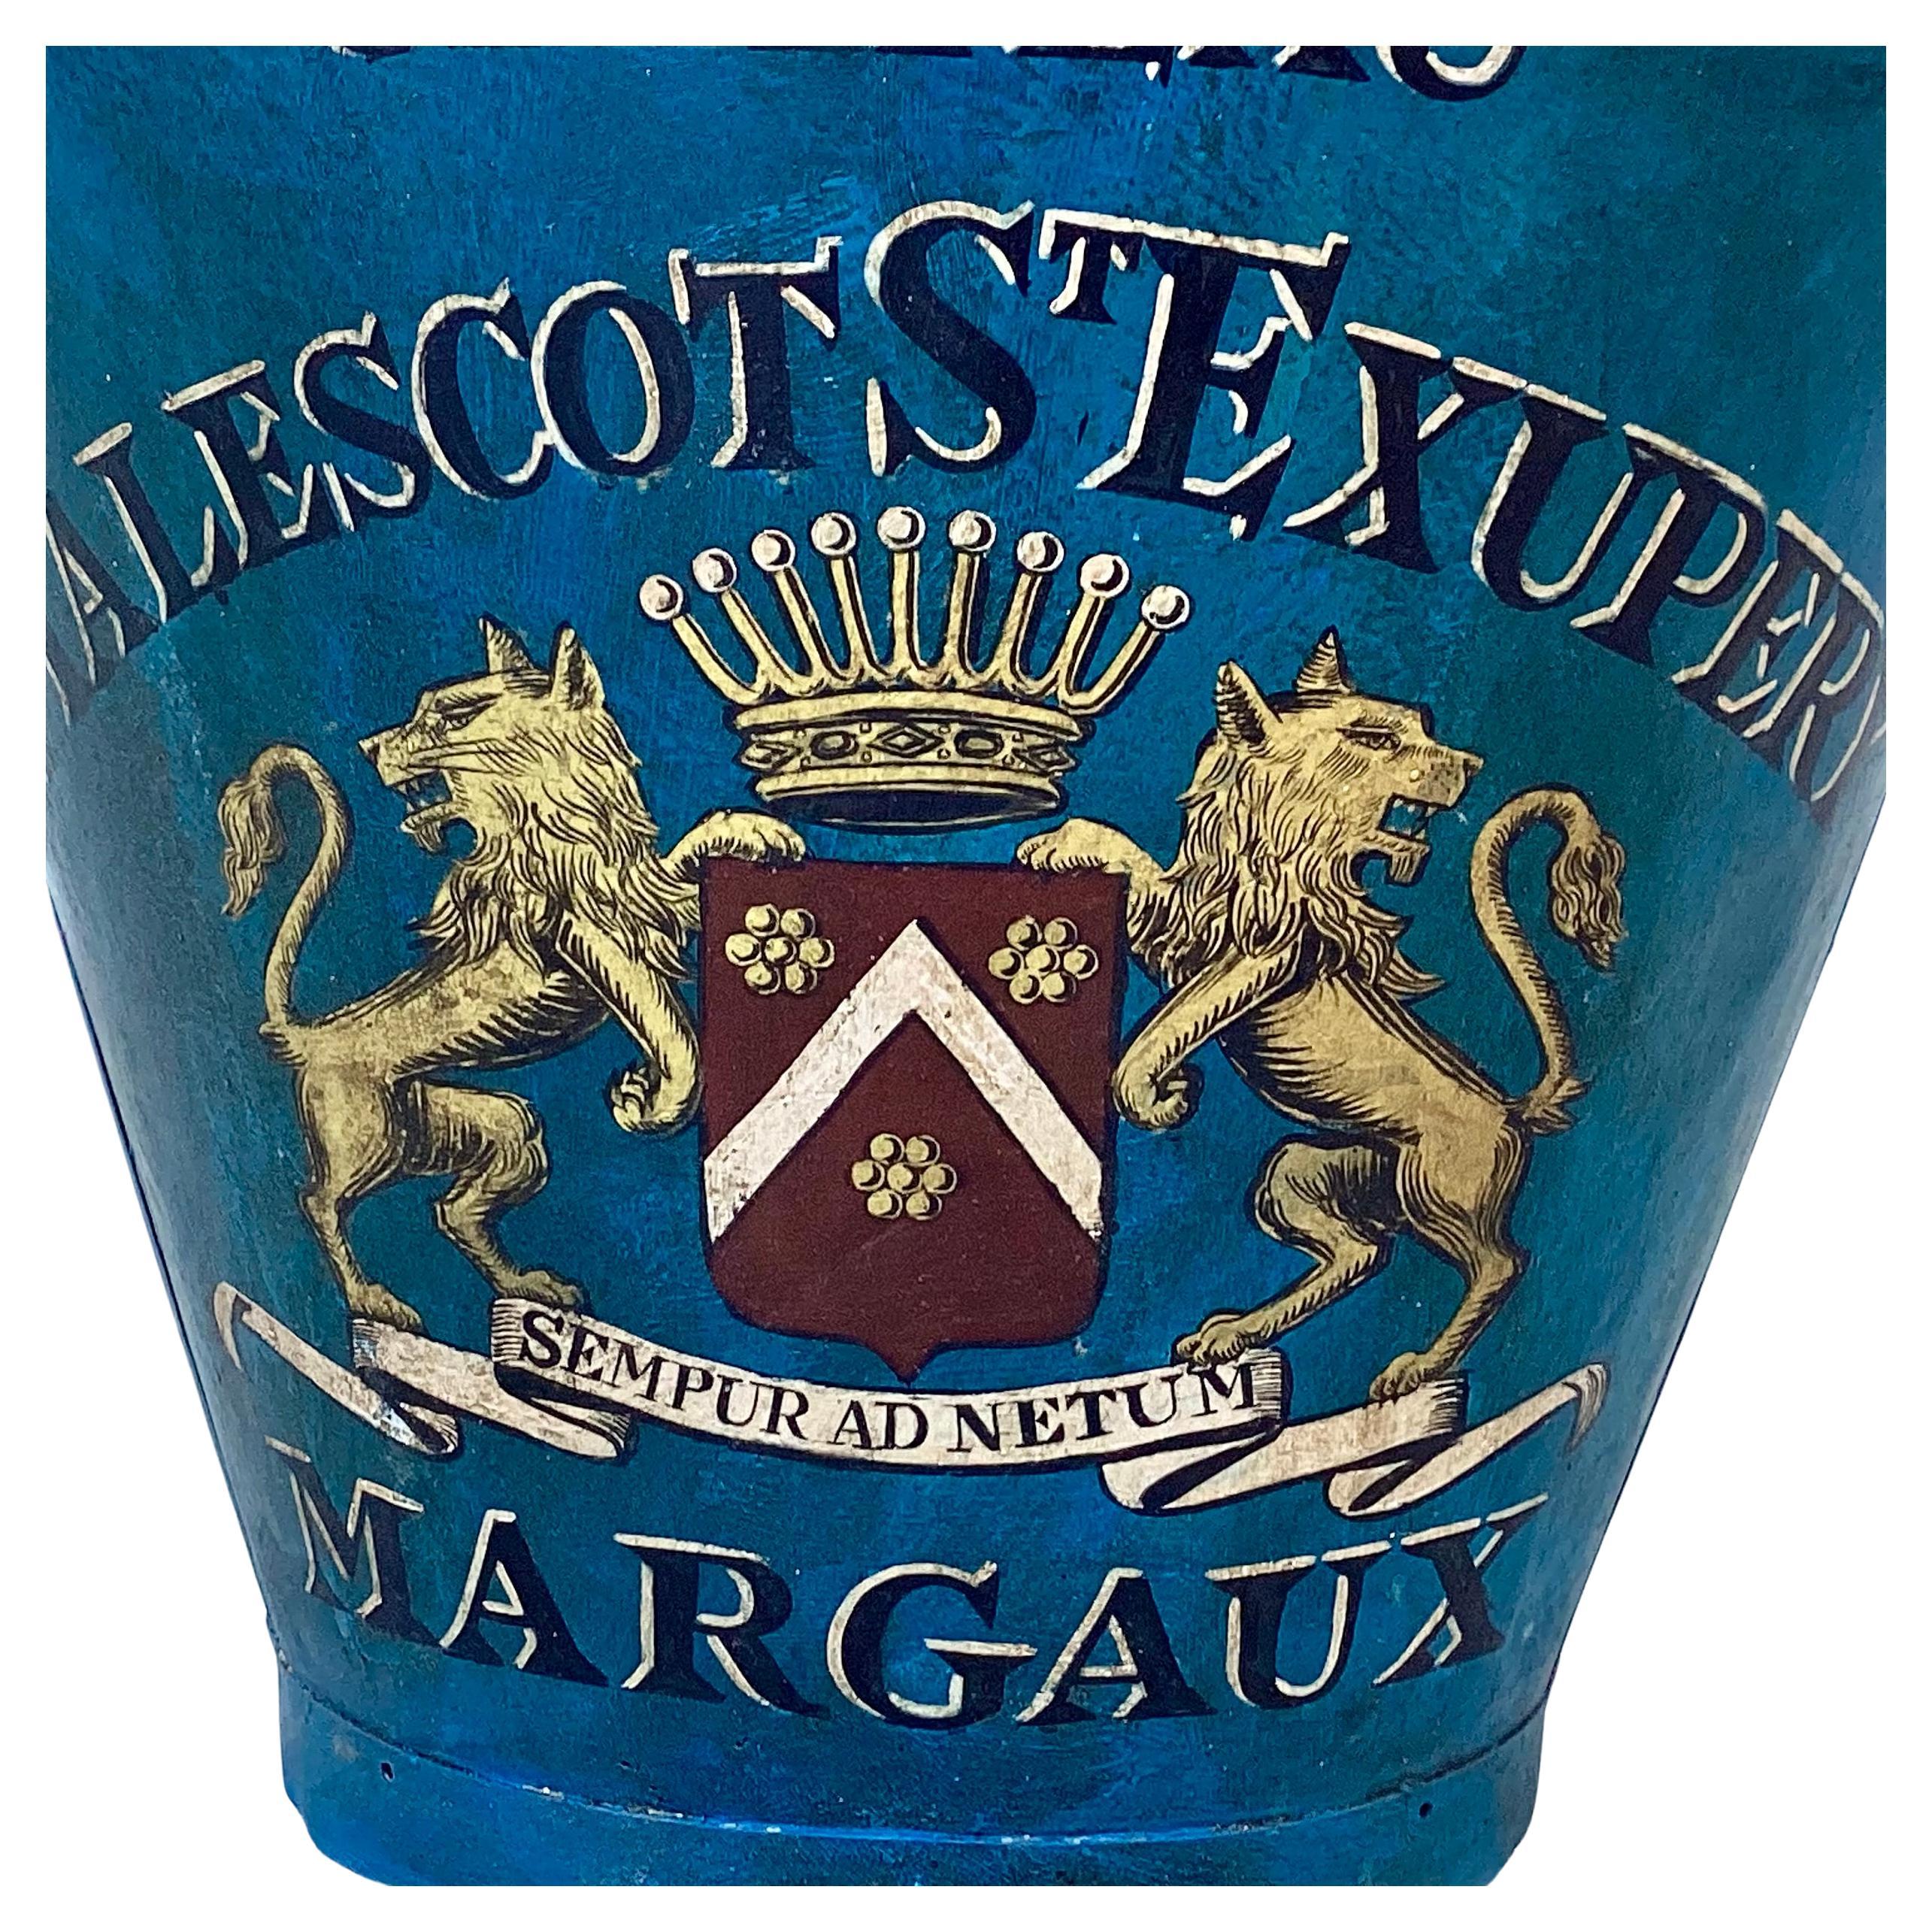 Wonderful late 19th/early 20th century grape hod wine bucket. Bucket has hand painted French designed artwork with the words 